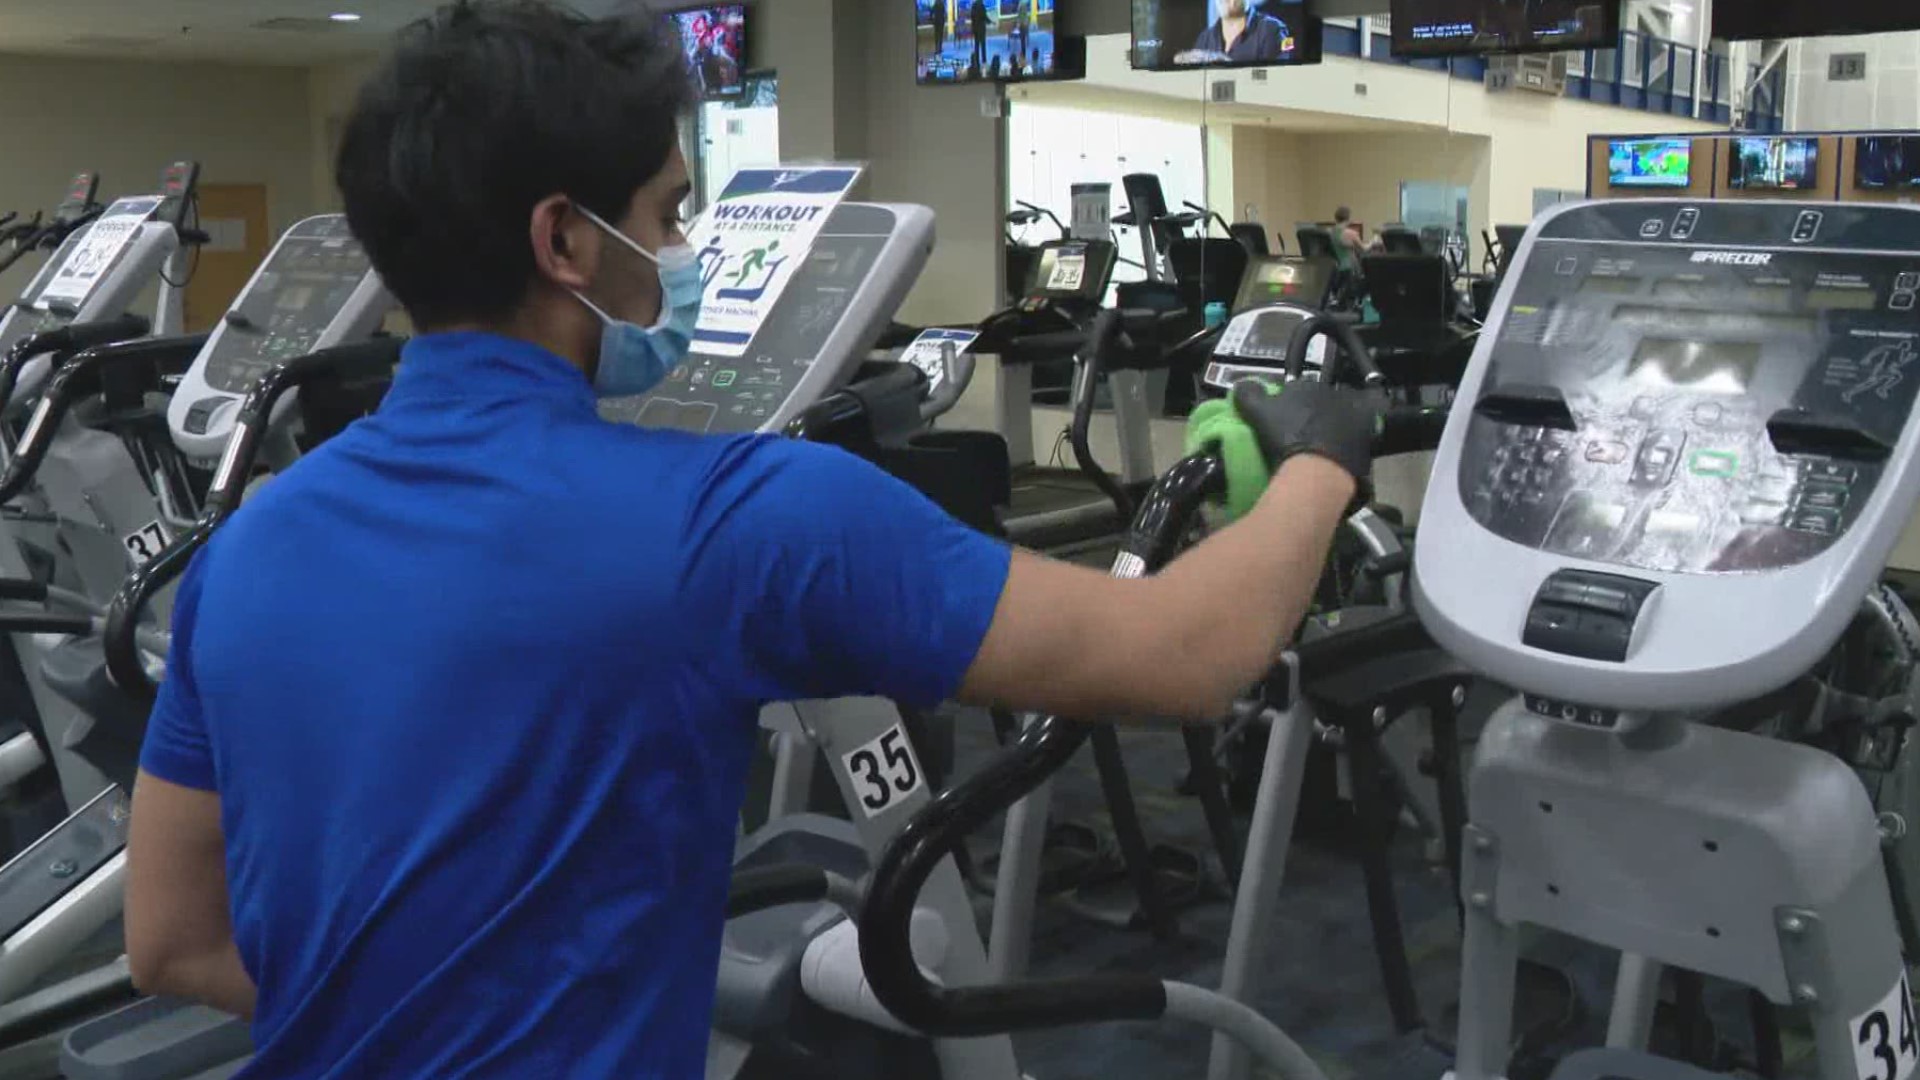 It's one of the most popular New Year's resolutions year after year – getting fit and exercising more. Health clubs are hoping for a 2021 comeback.